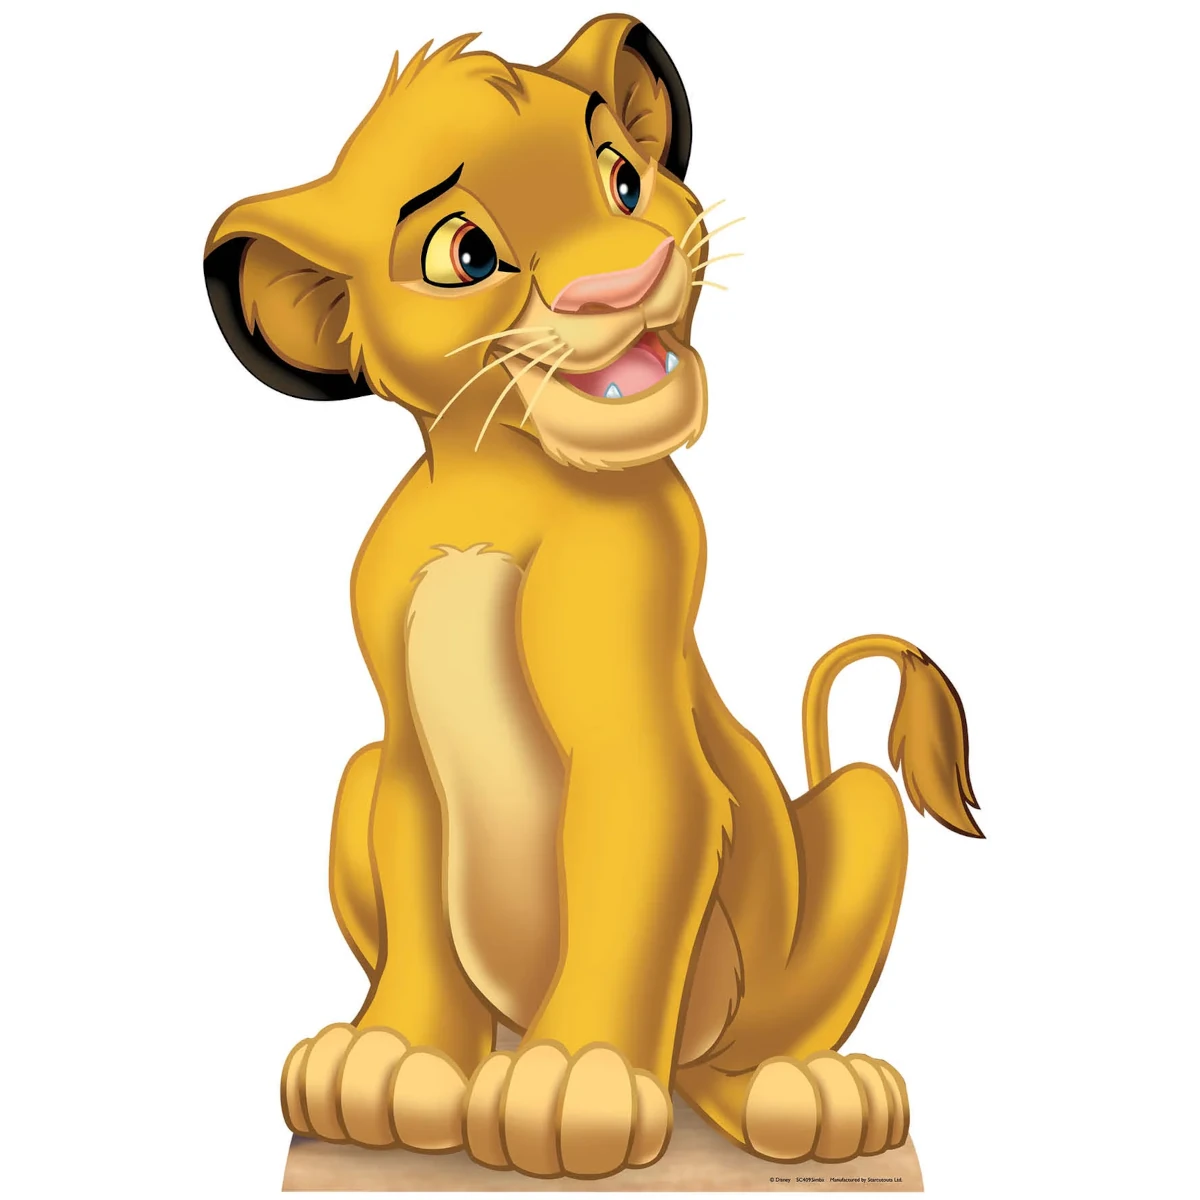 SC409 Simba (Disney Classics The Lion King) Official Mini Cardboard Cutout Standee Front